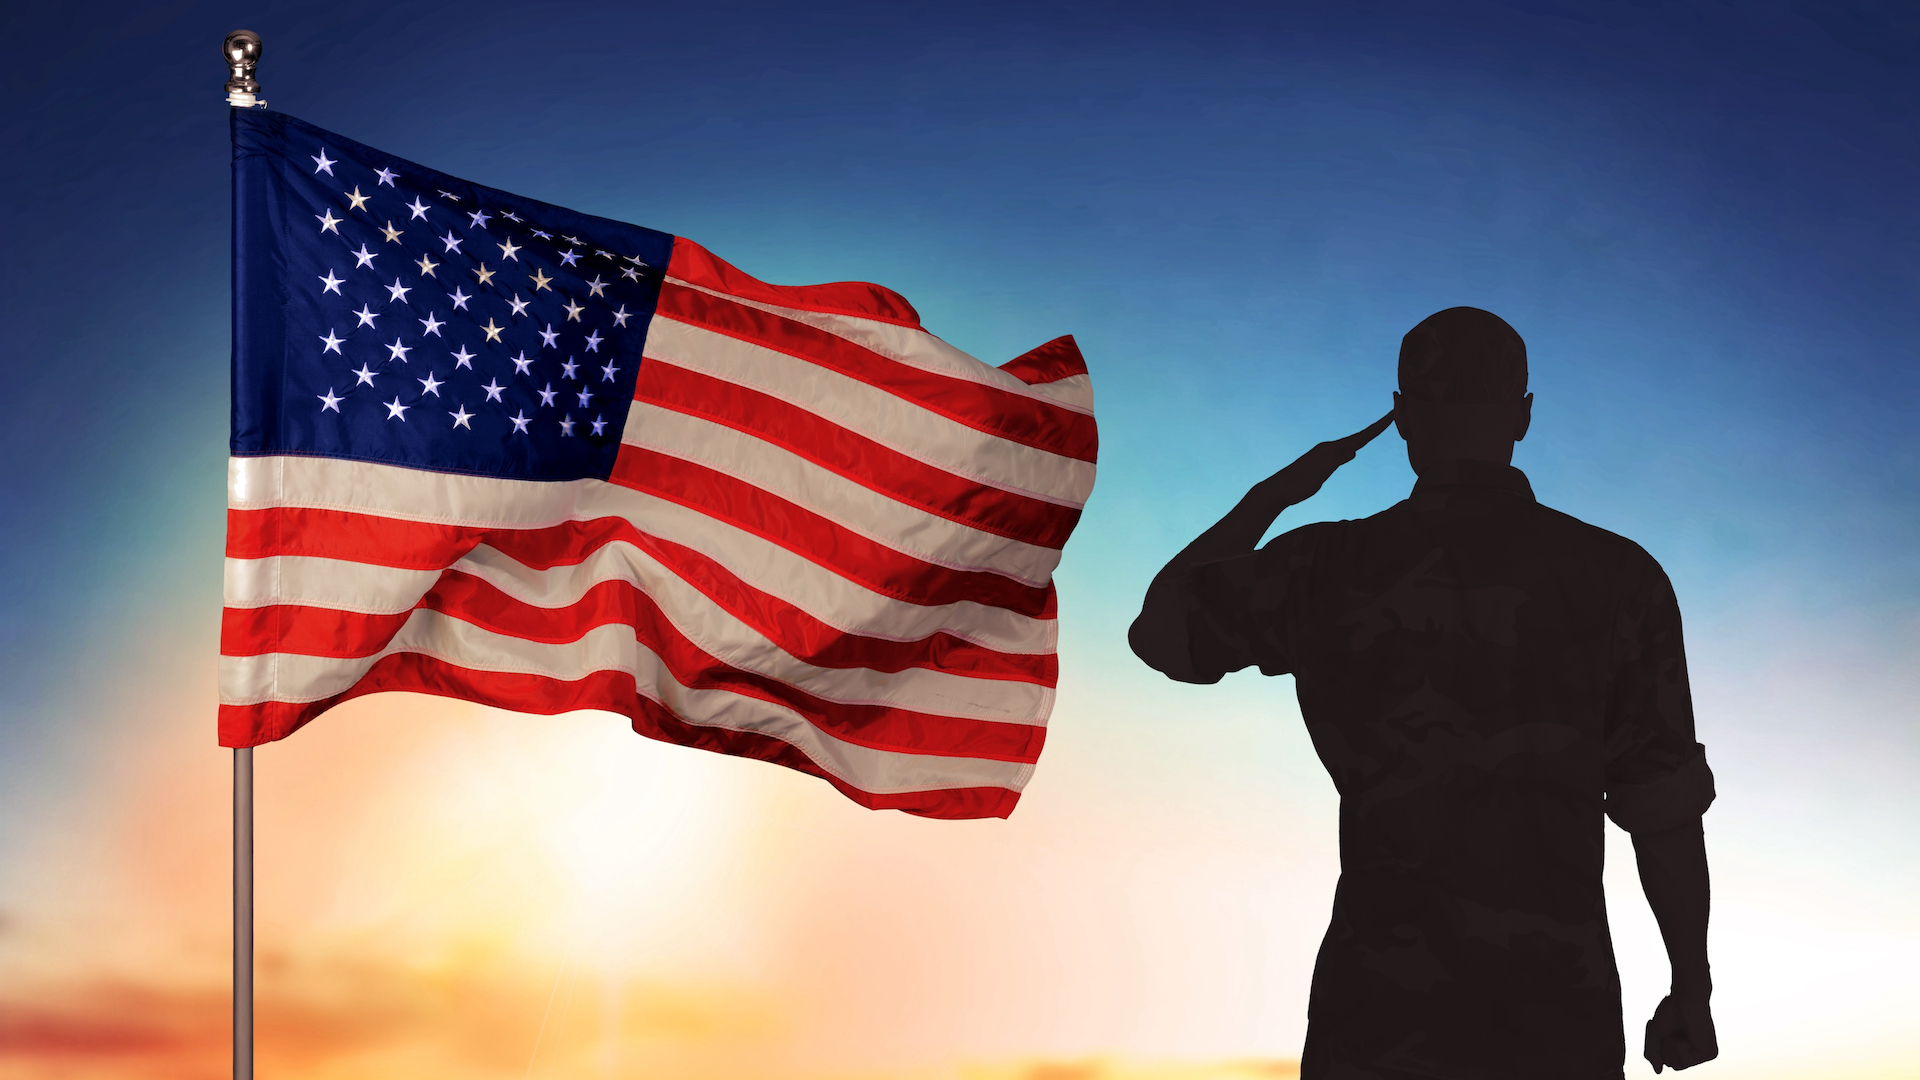 A person saluting next to the USA flag